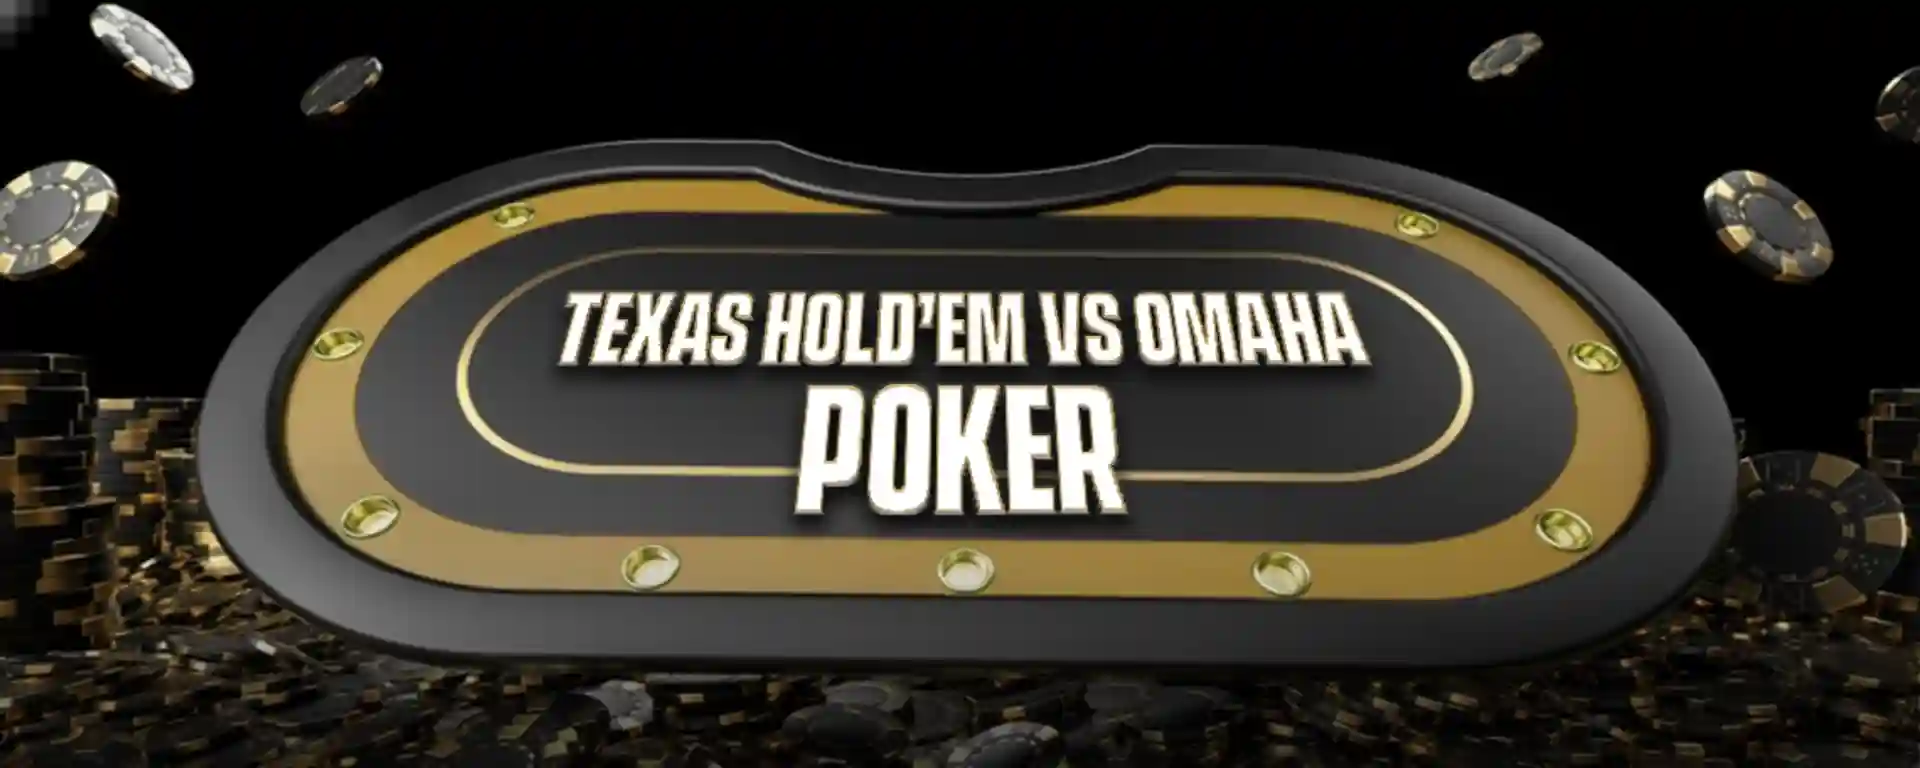 How Texas Hold’em And Omaha Poker Differ From Each Other